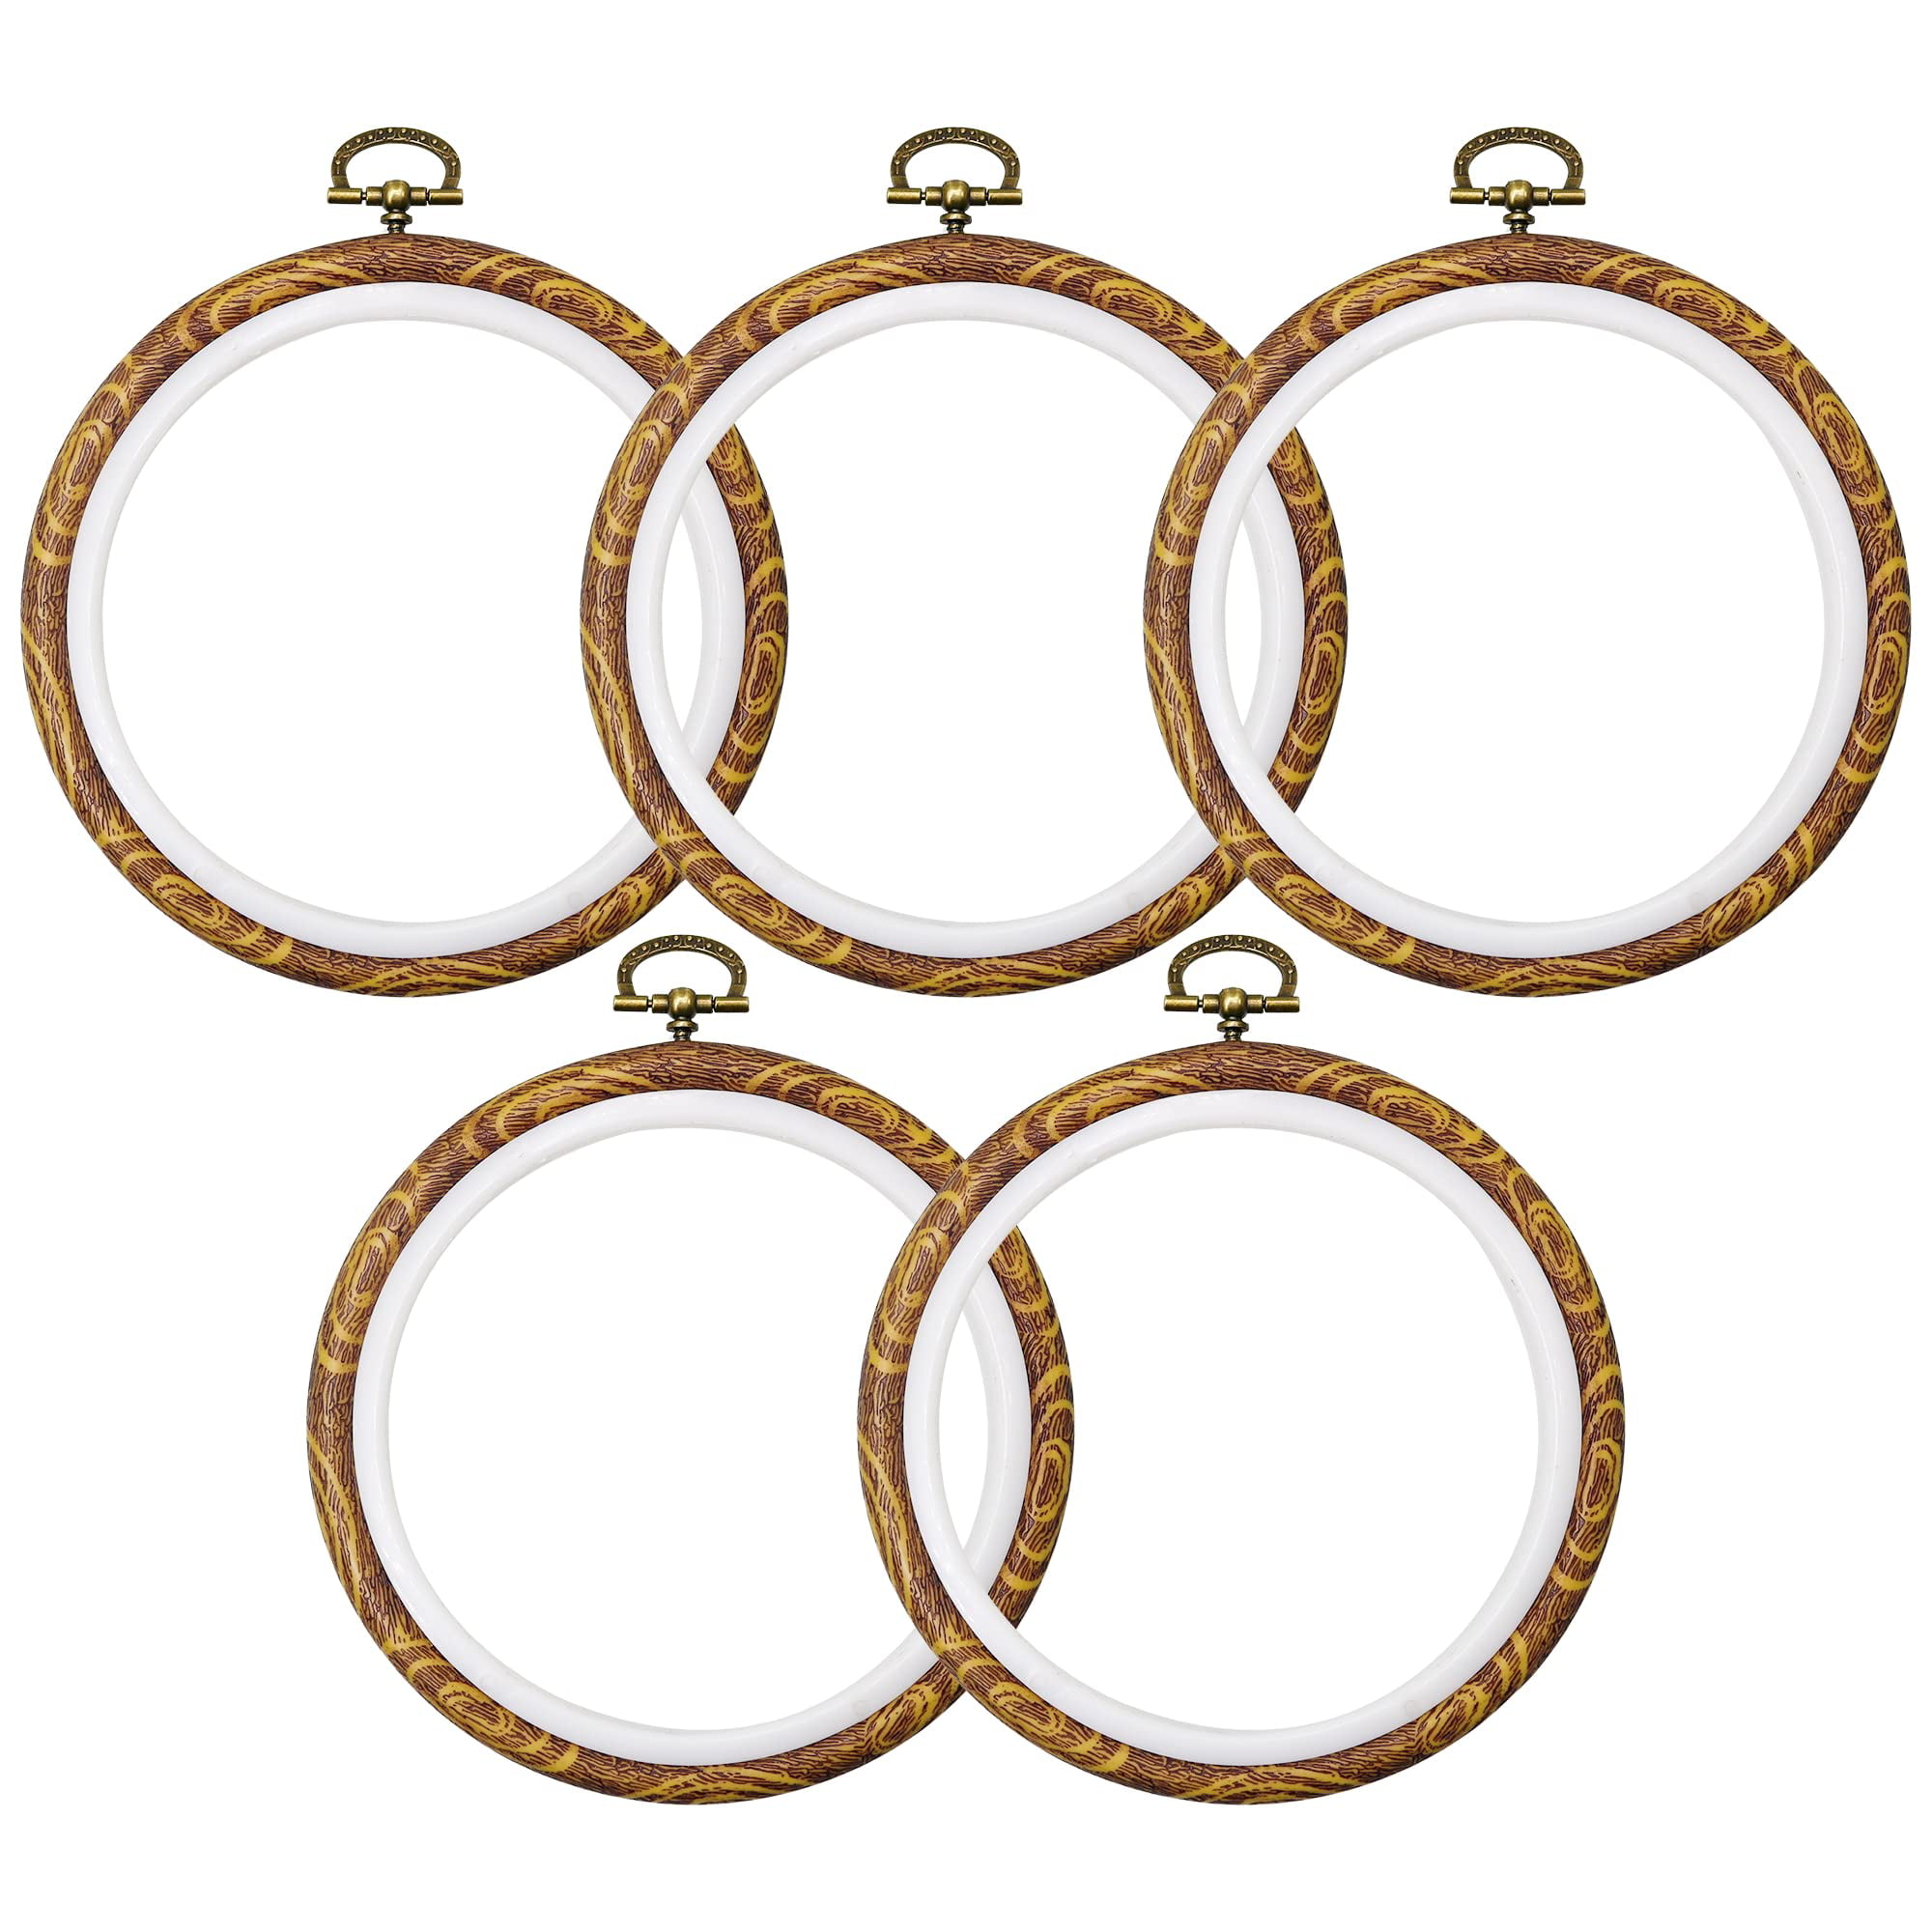  XEmbro Wood Embroidery Hoop Frame Set, Oval Wood Embroidery  Display Frame with Plastic Embroidery Hoop for Finished Cross Stitch Hoop  Frame DIY Craft Projects, and Christmas Ornaments